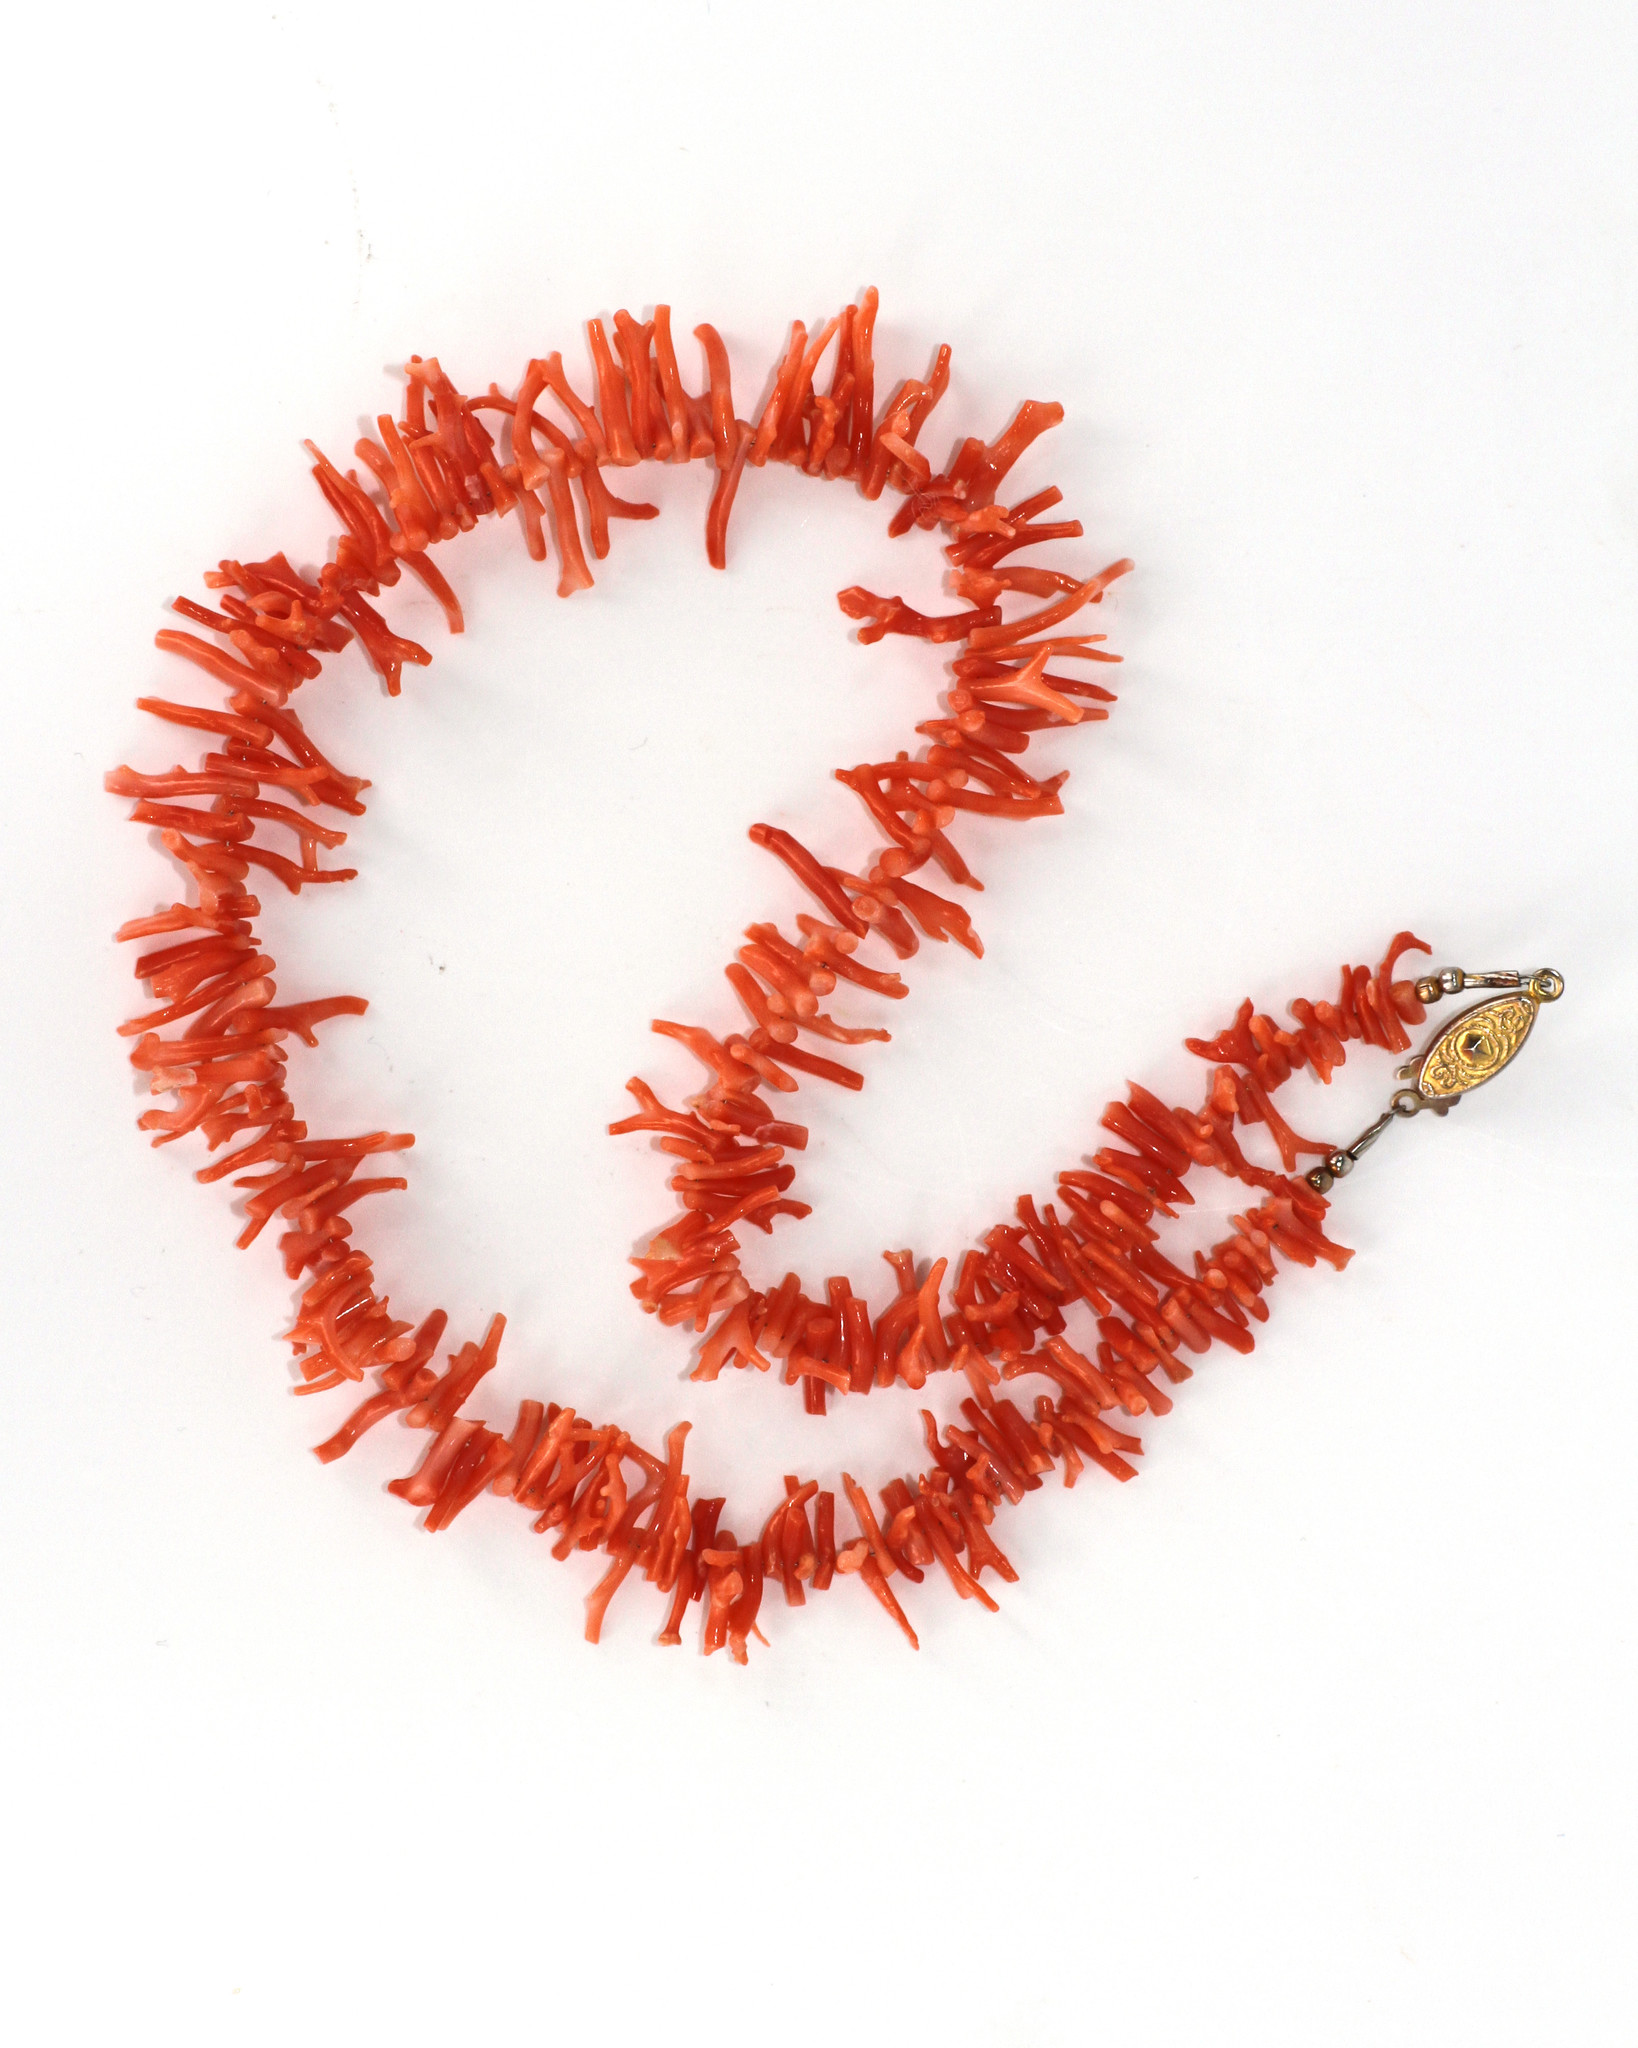 Red Coral Branch Pendant Charm for Necklace